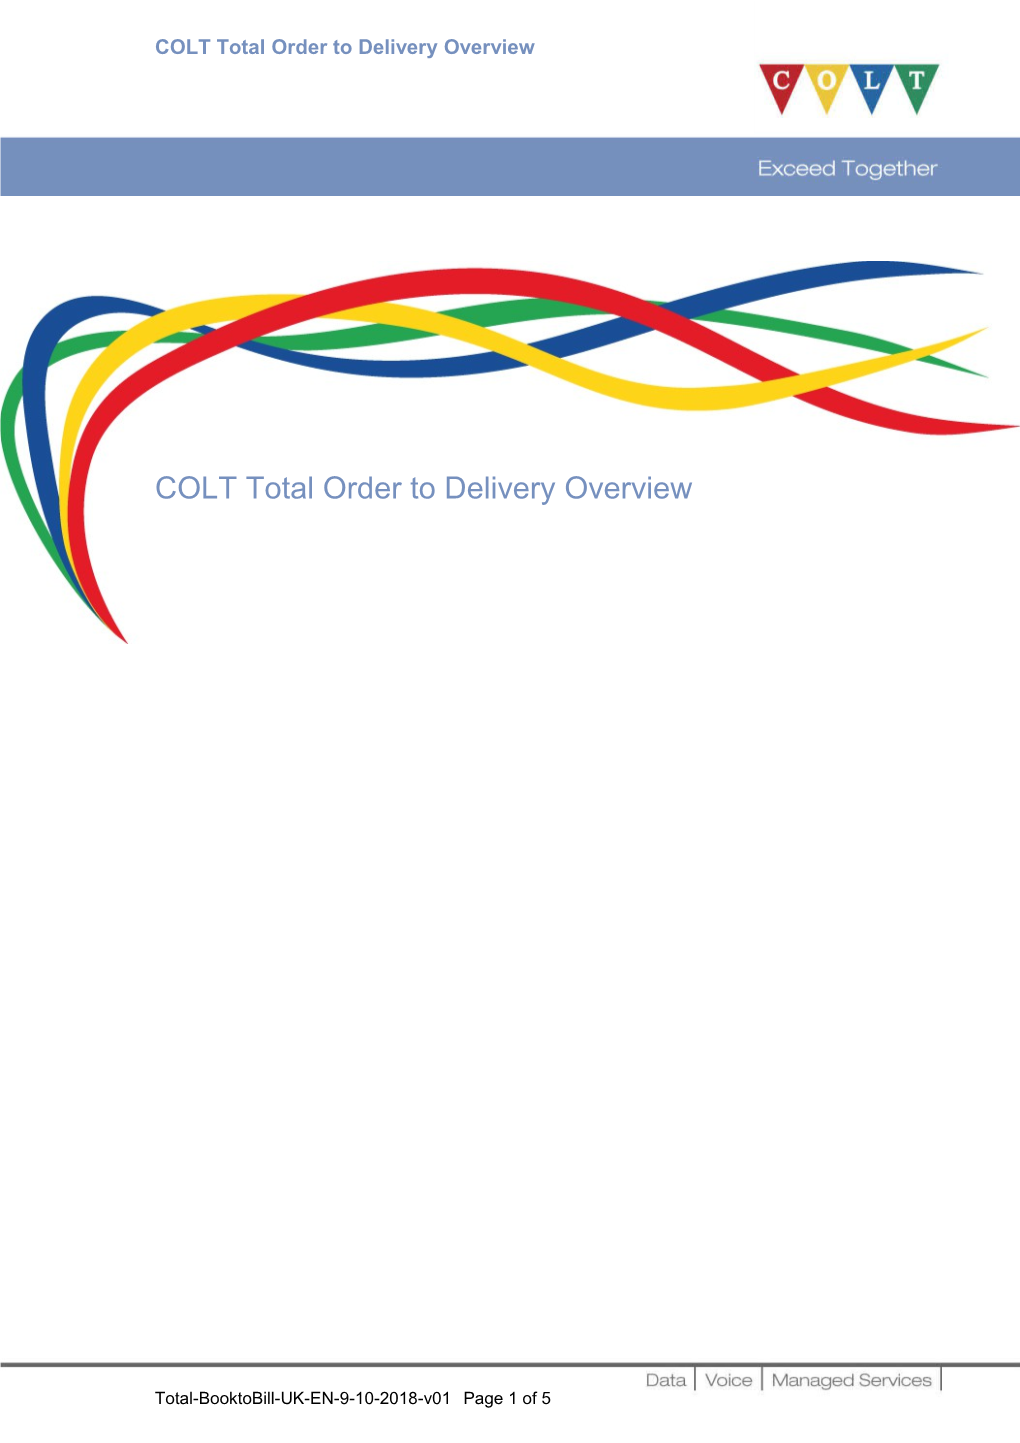 COLT Total Order to Delivery Overview